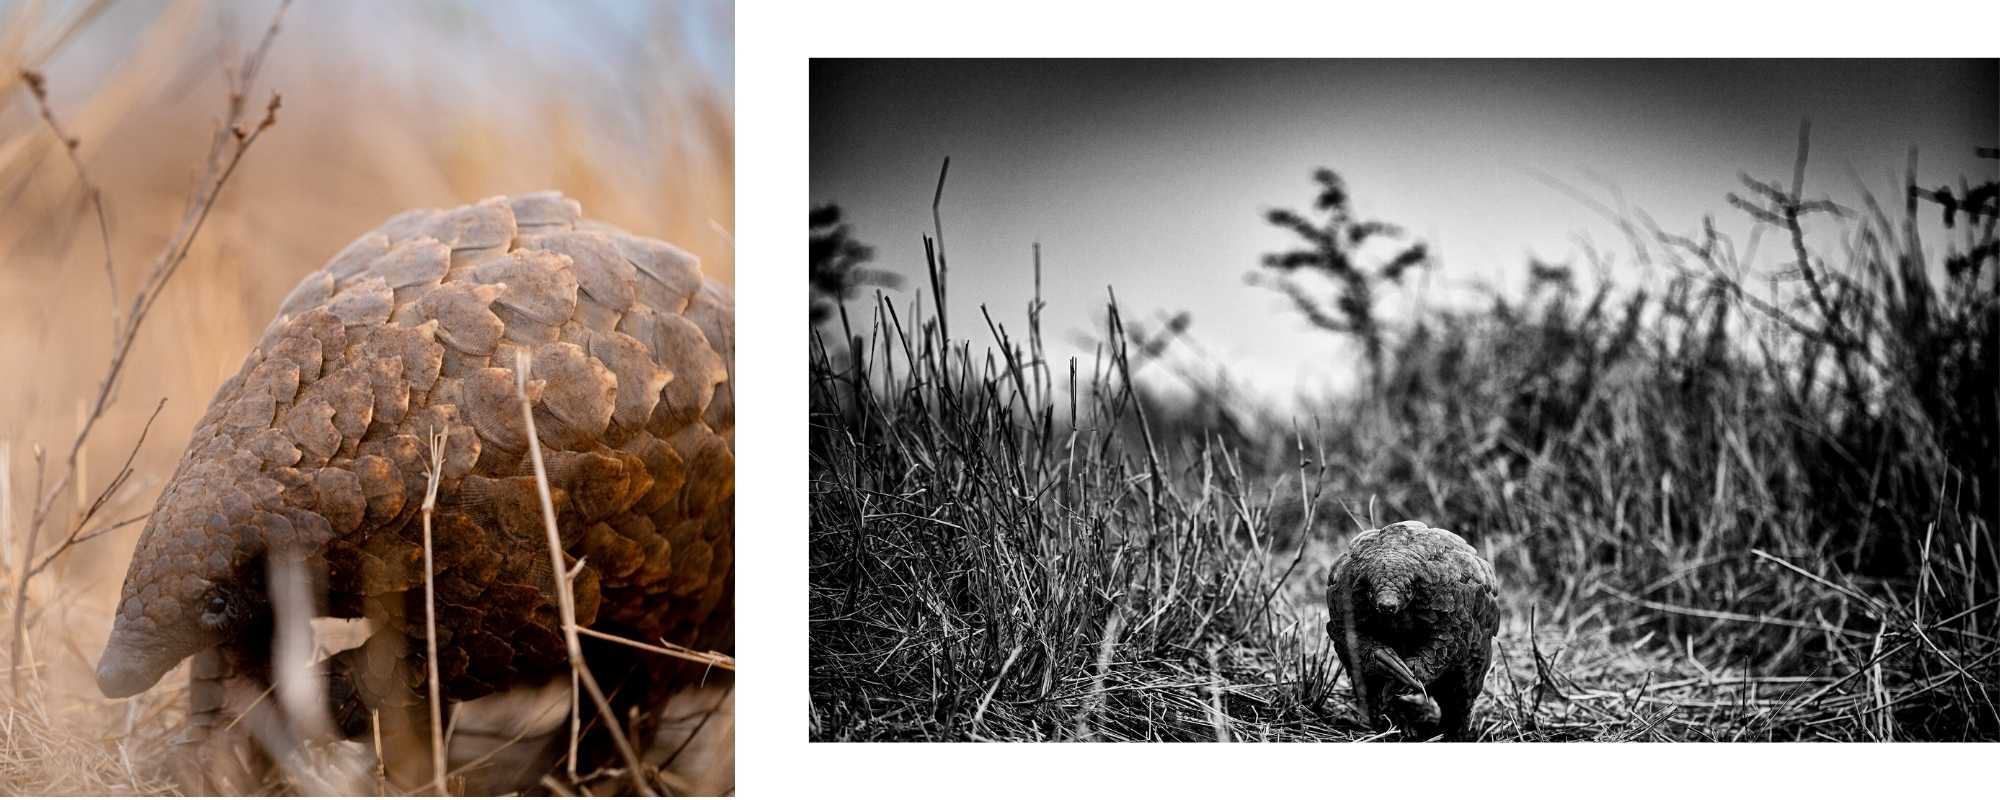 Pangolin photos by Shannon Wild